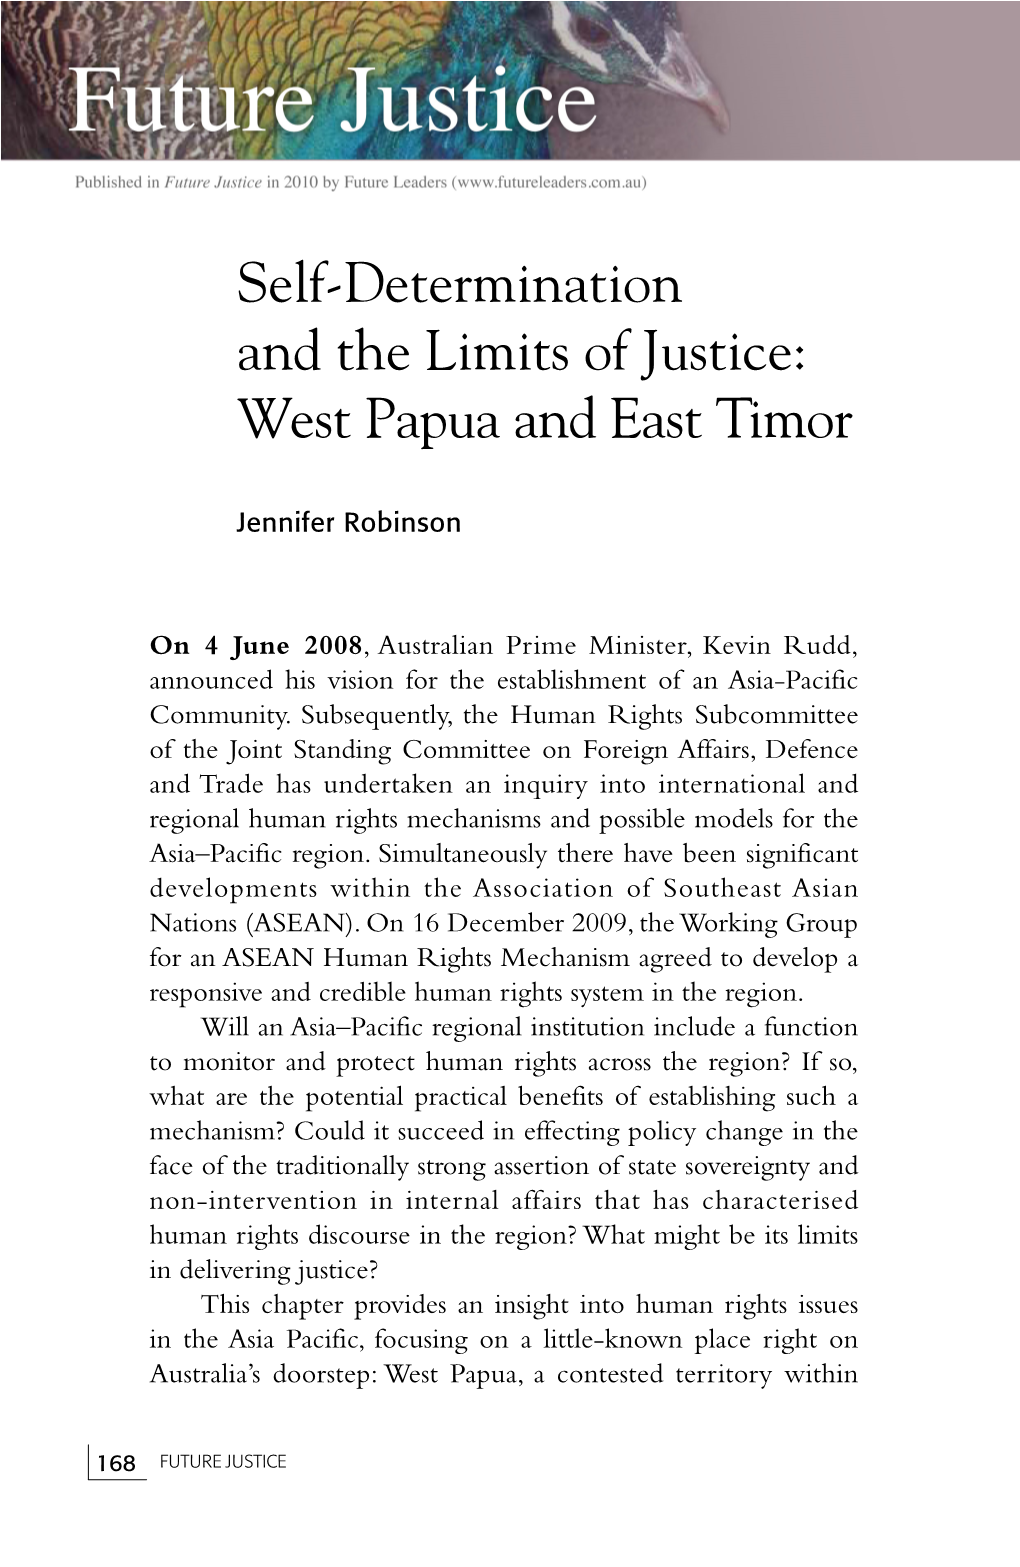 Self-Determination and the Limits of Justice: West Papua and East Timor